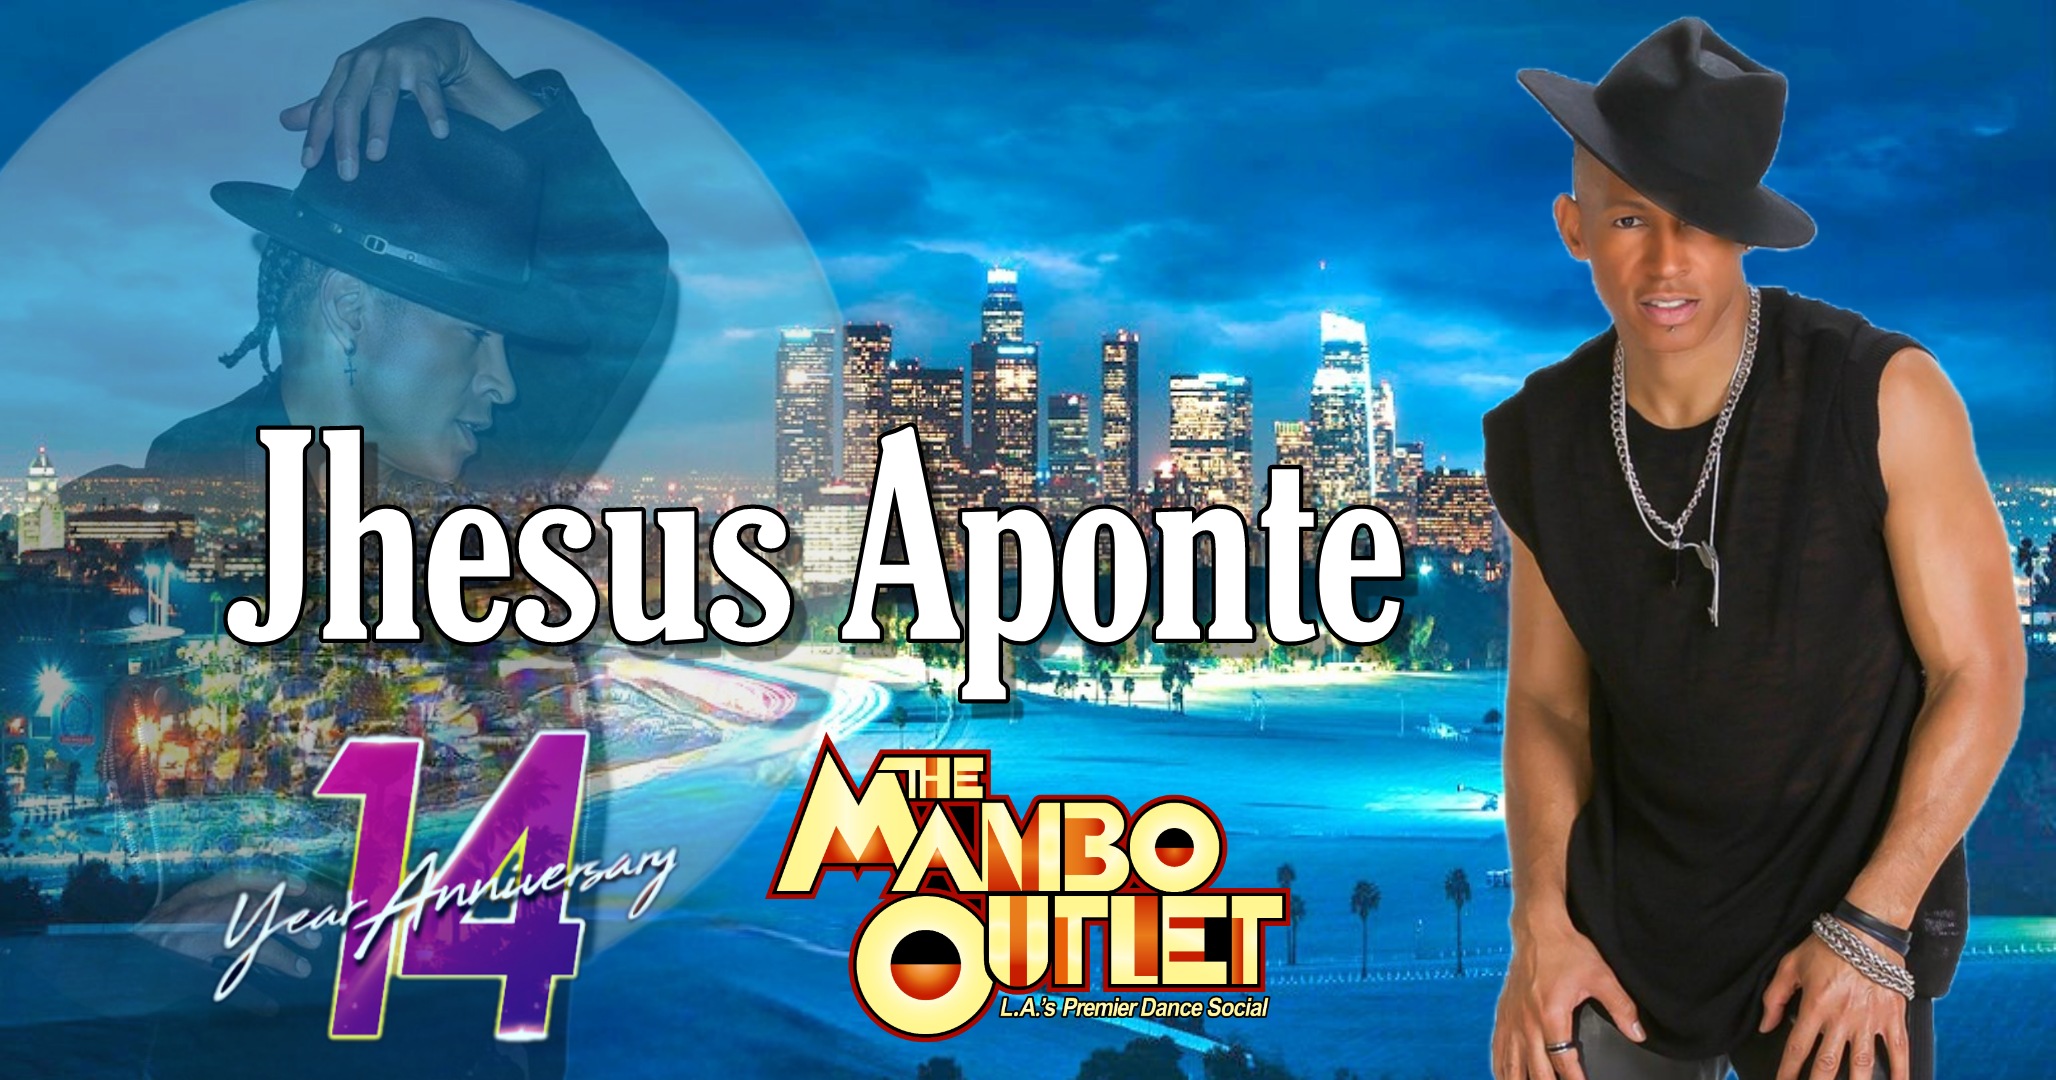 The Mambo Outlet 14 Year Anniversary! – Jhesus Aponte – 2-HR Workshop – Saturday, May 20, 2023